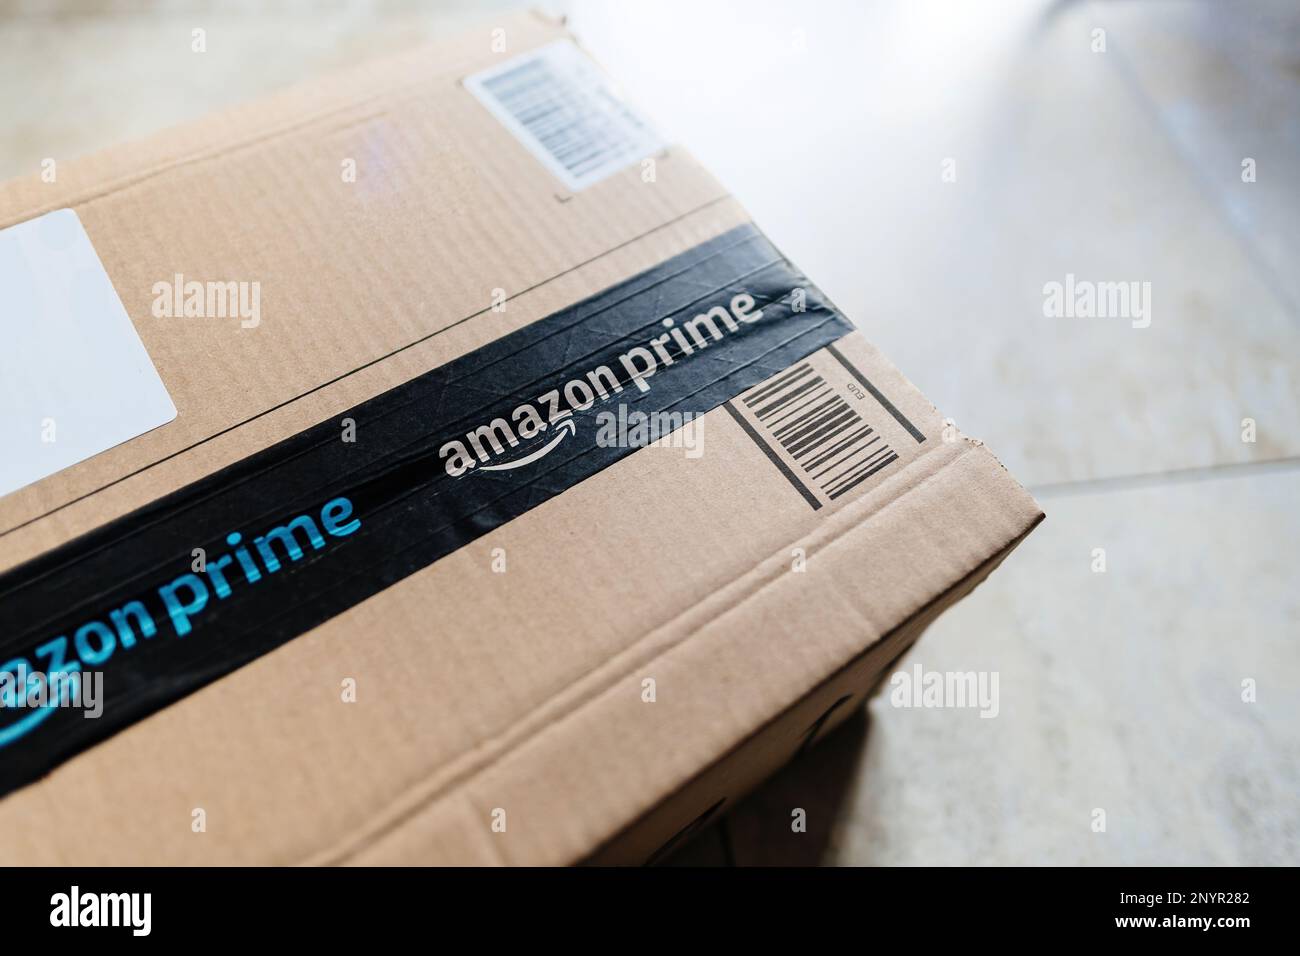 Paris, France - Mar 1, 2023: Amazon Prime cardboard parcel on the floor right before the unboxing unpacking Stock Photo